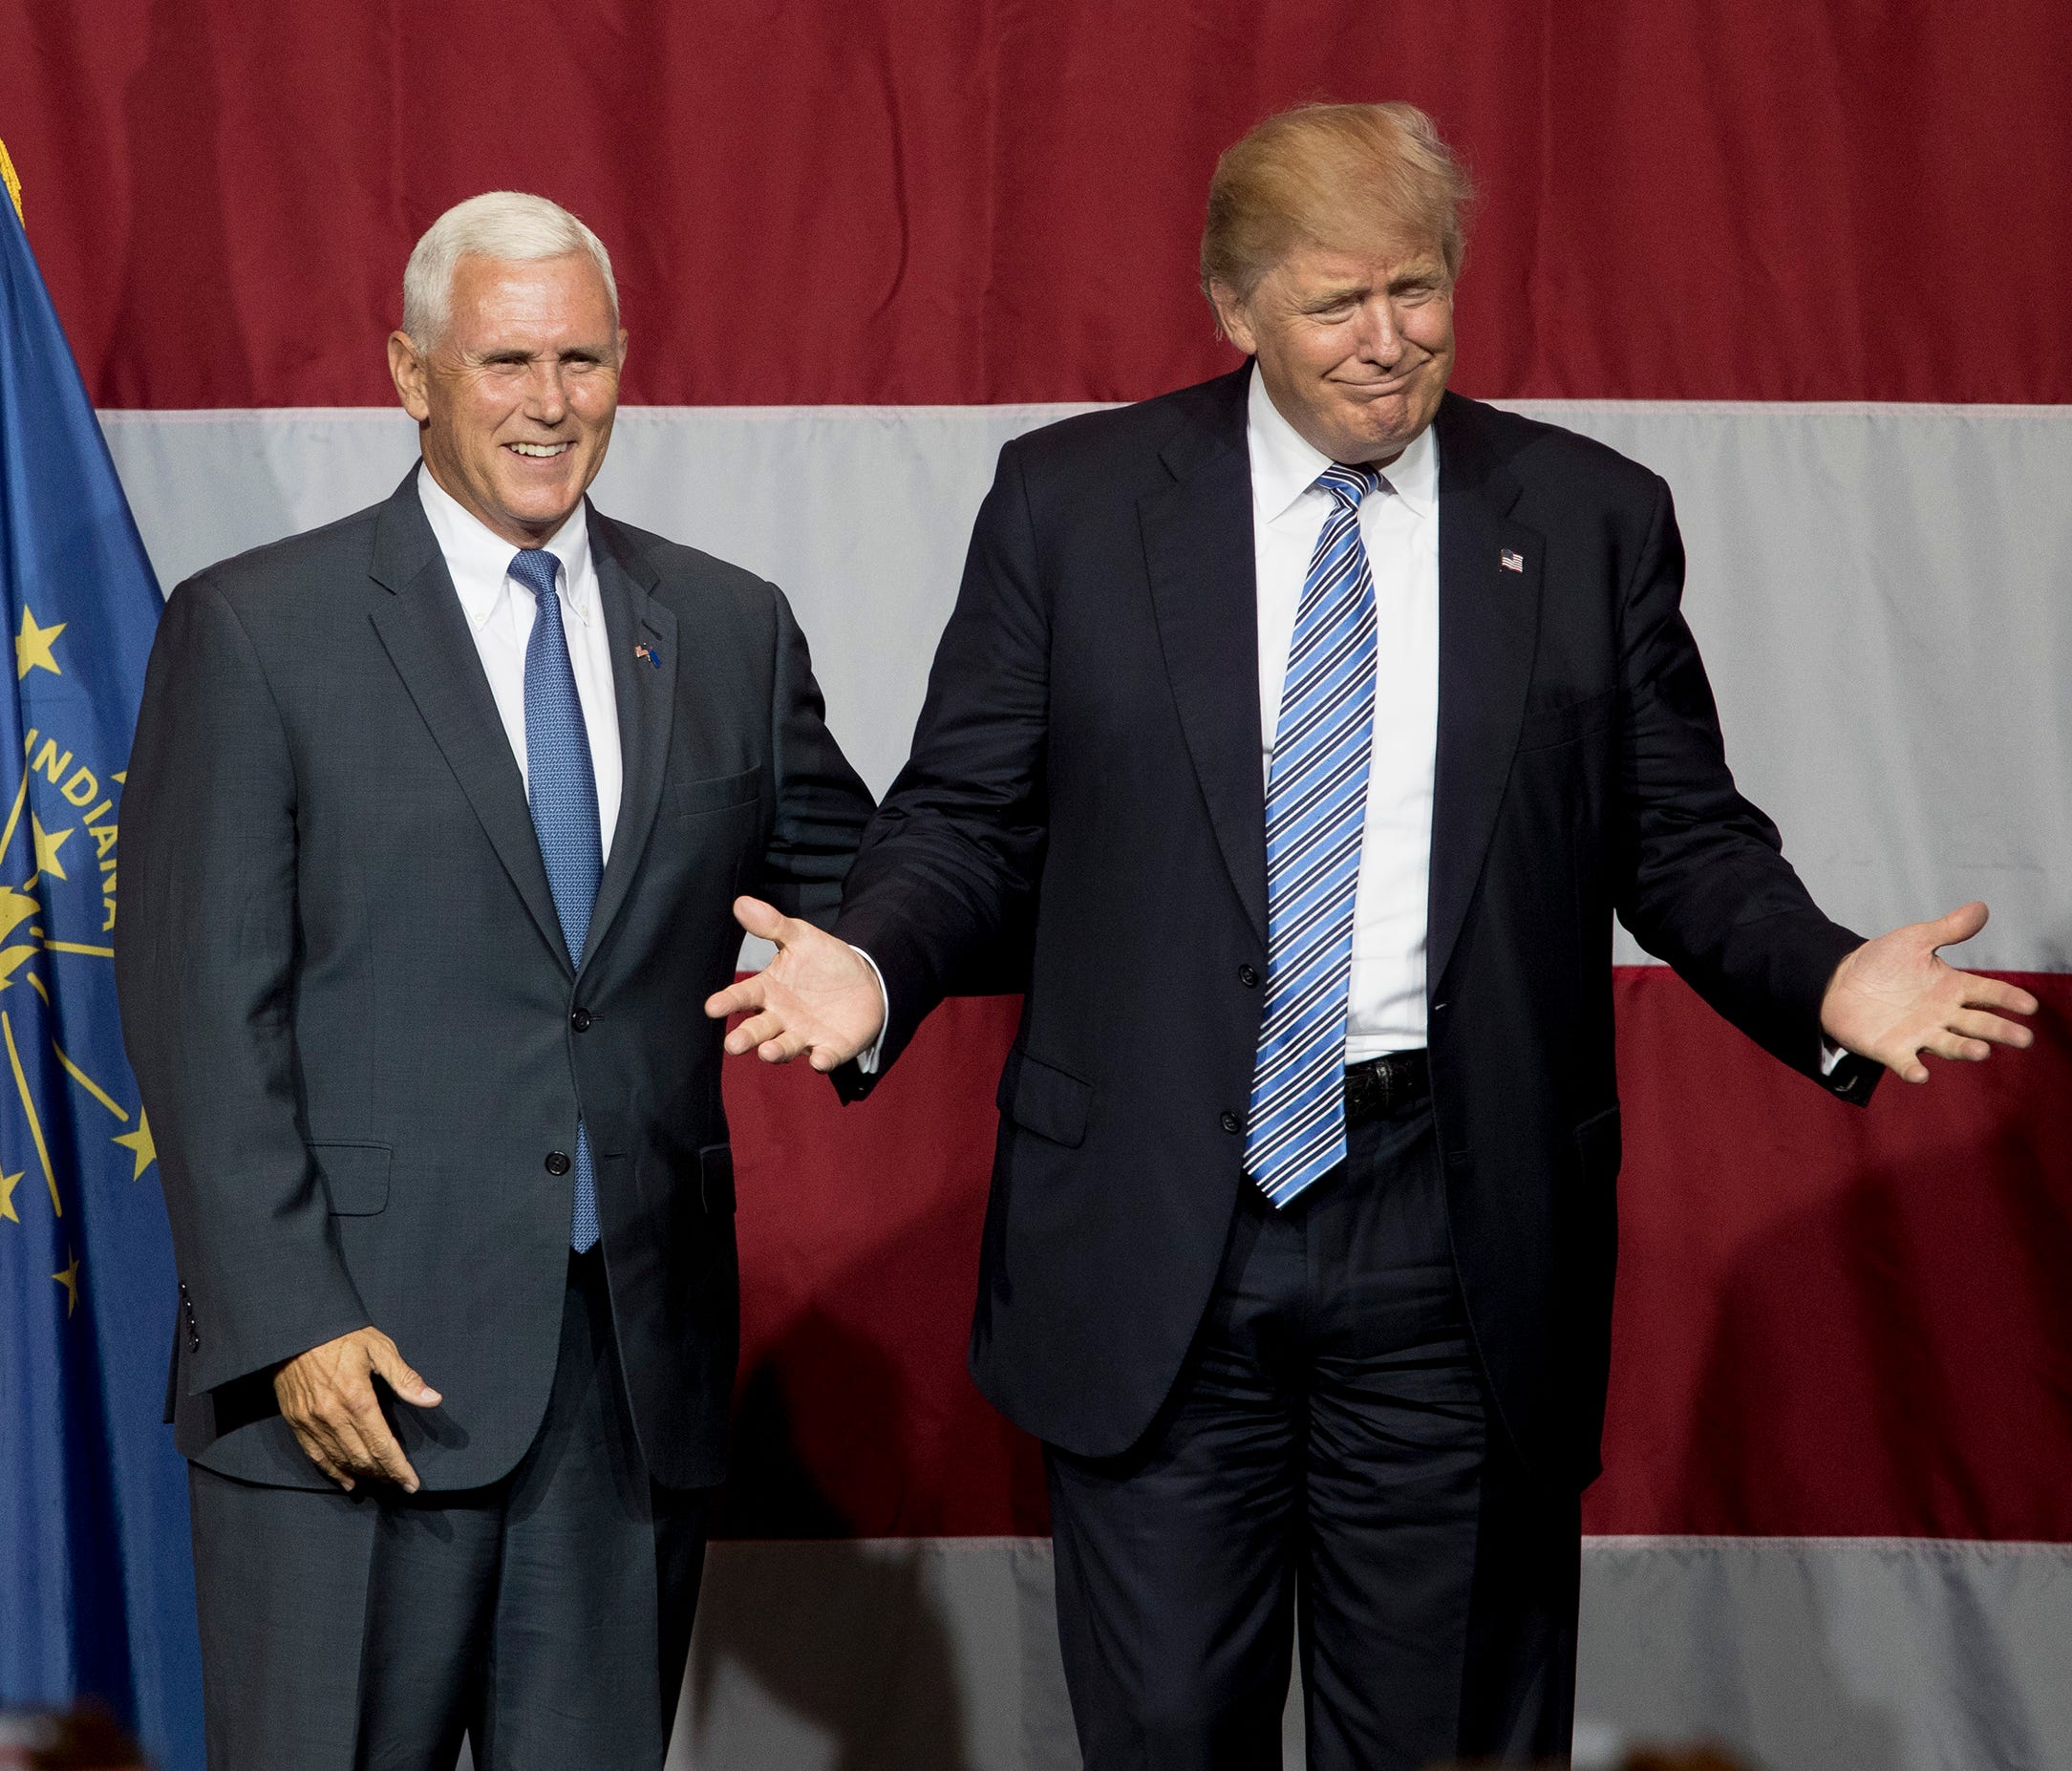 Republican presidential candidate Donald Trump greets Indiana Gov. Mike Pence at the Grand Park Events Center on July 12, 2016 in Westfield, Indiana.  (Photo by Aaron P. Bernstein/Getty Images)